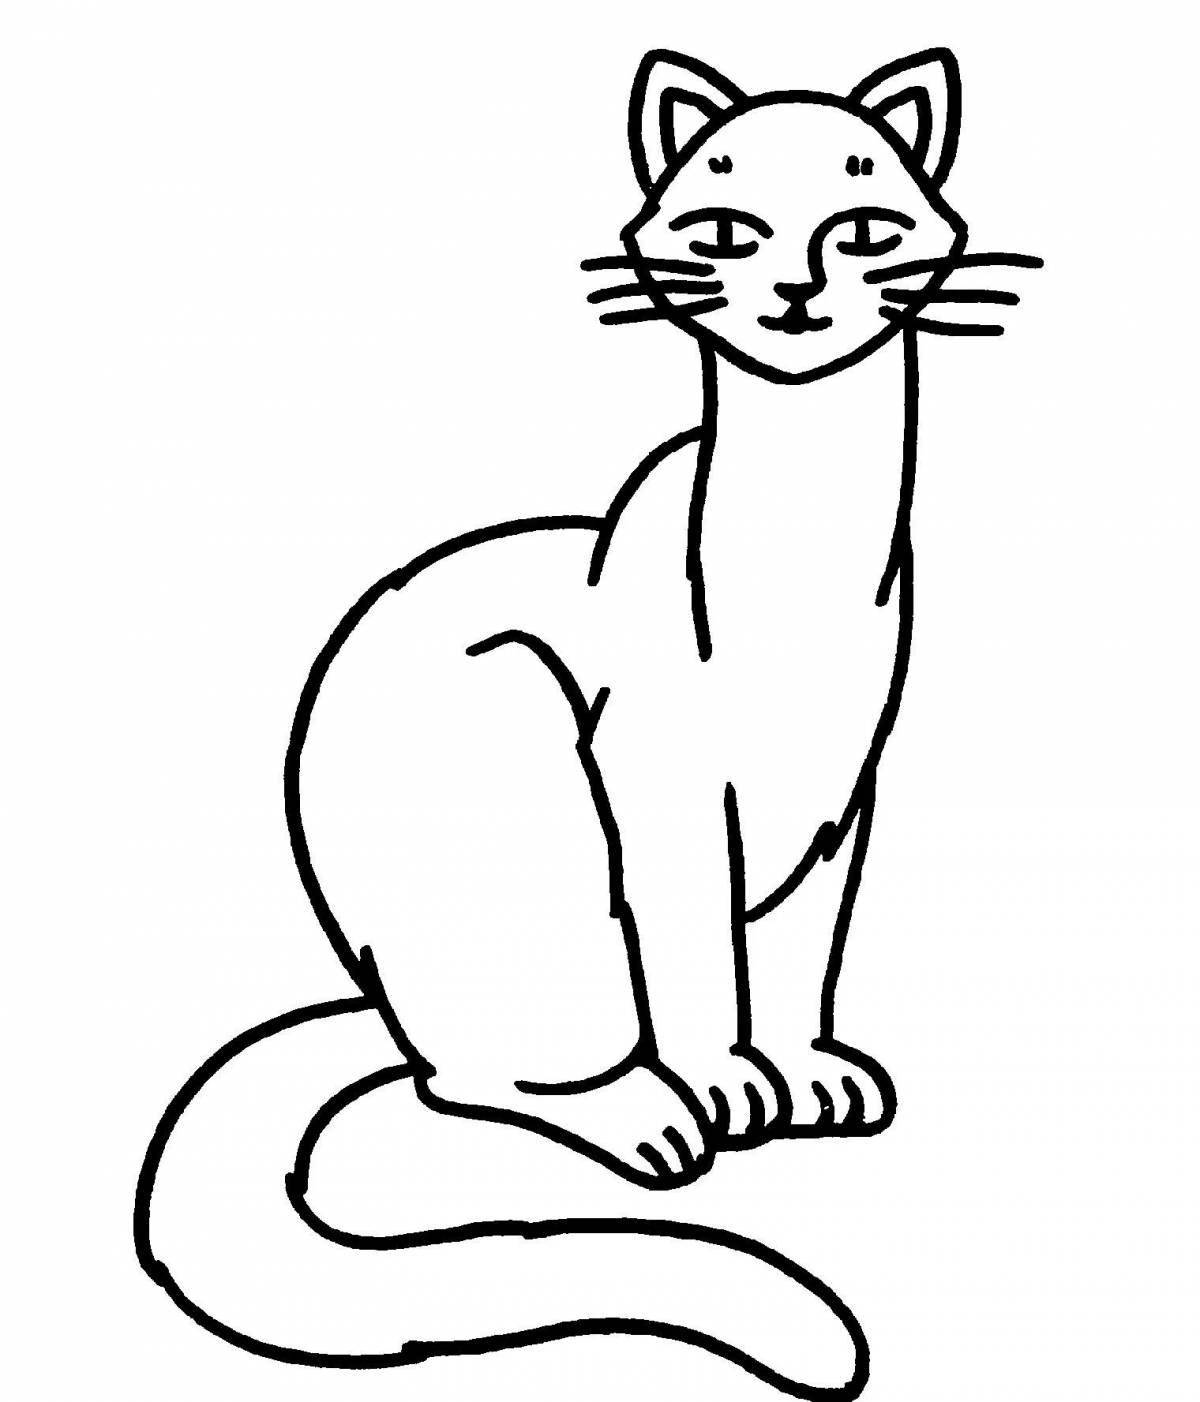 Playful sitting cat coloring page